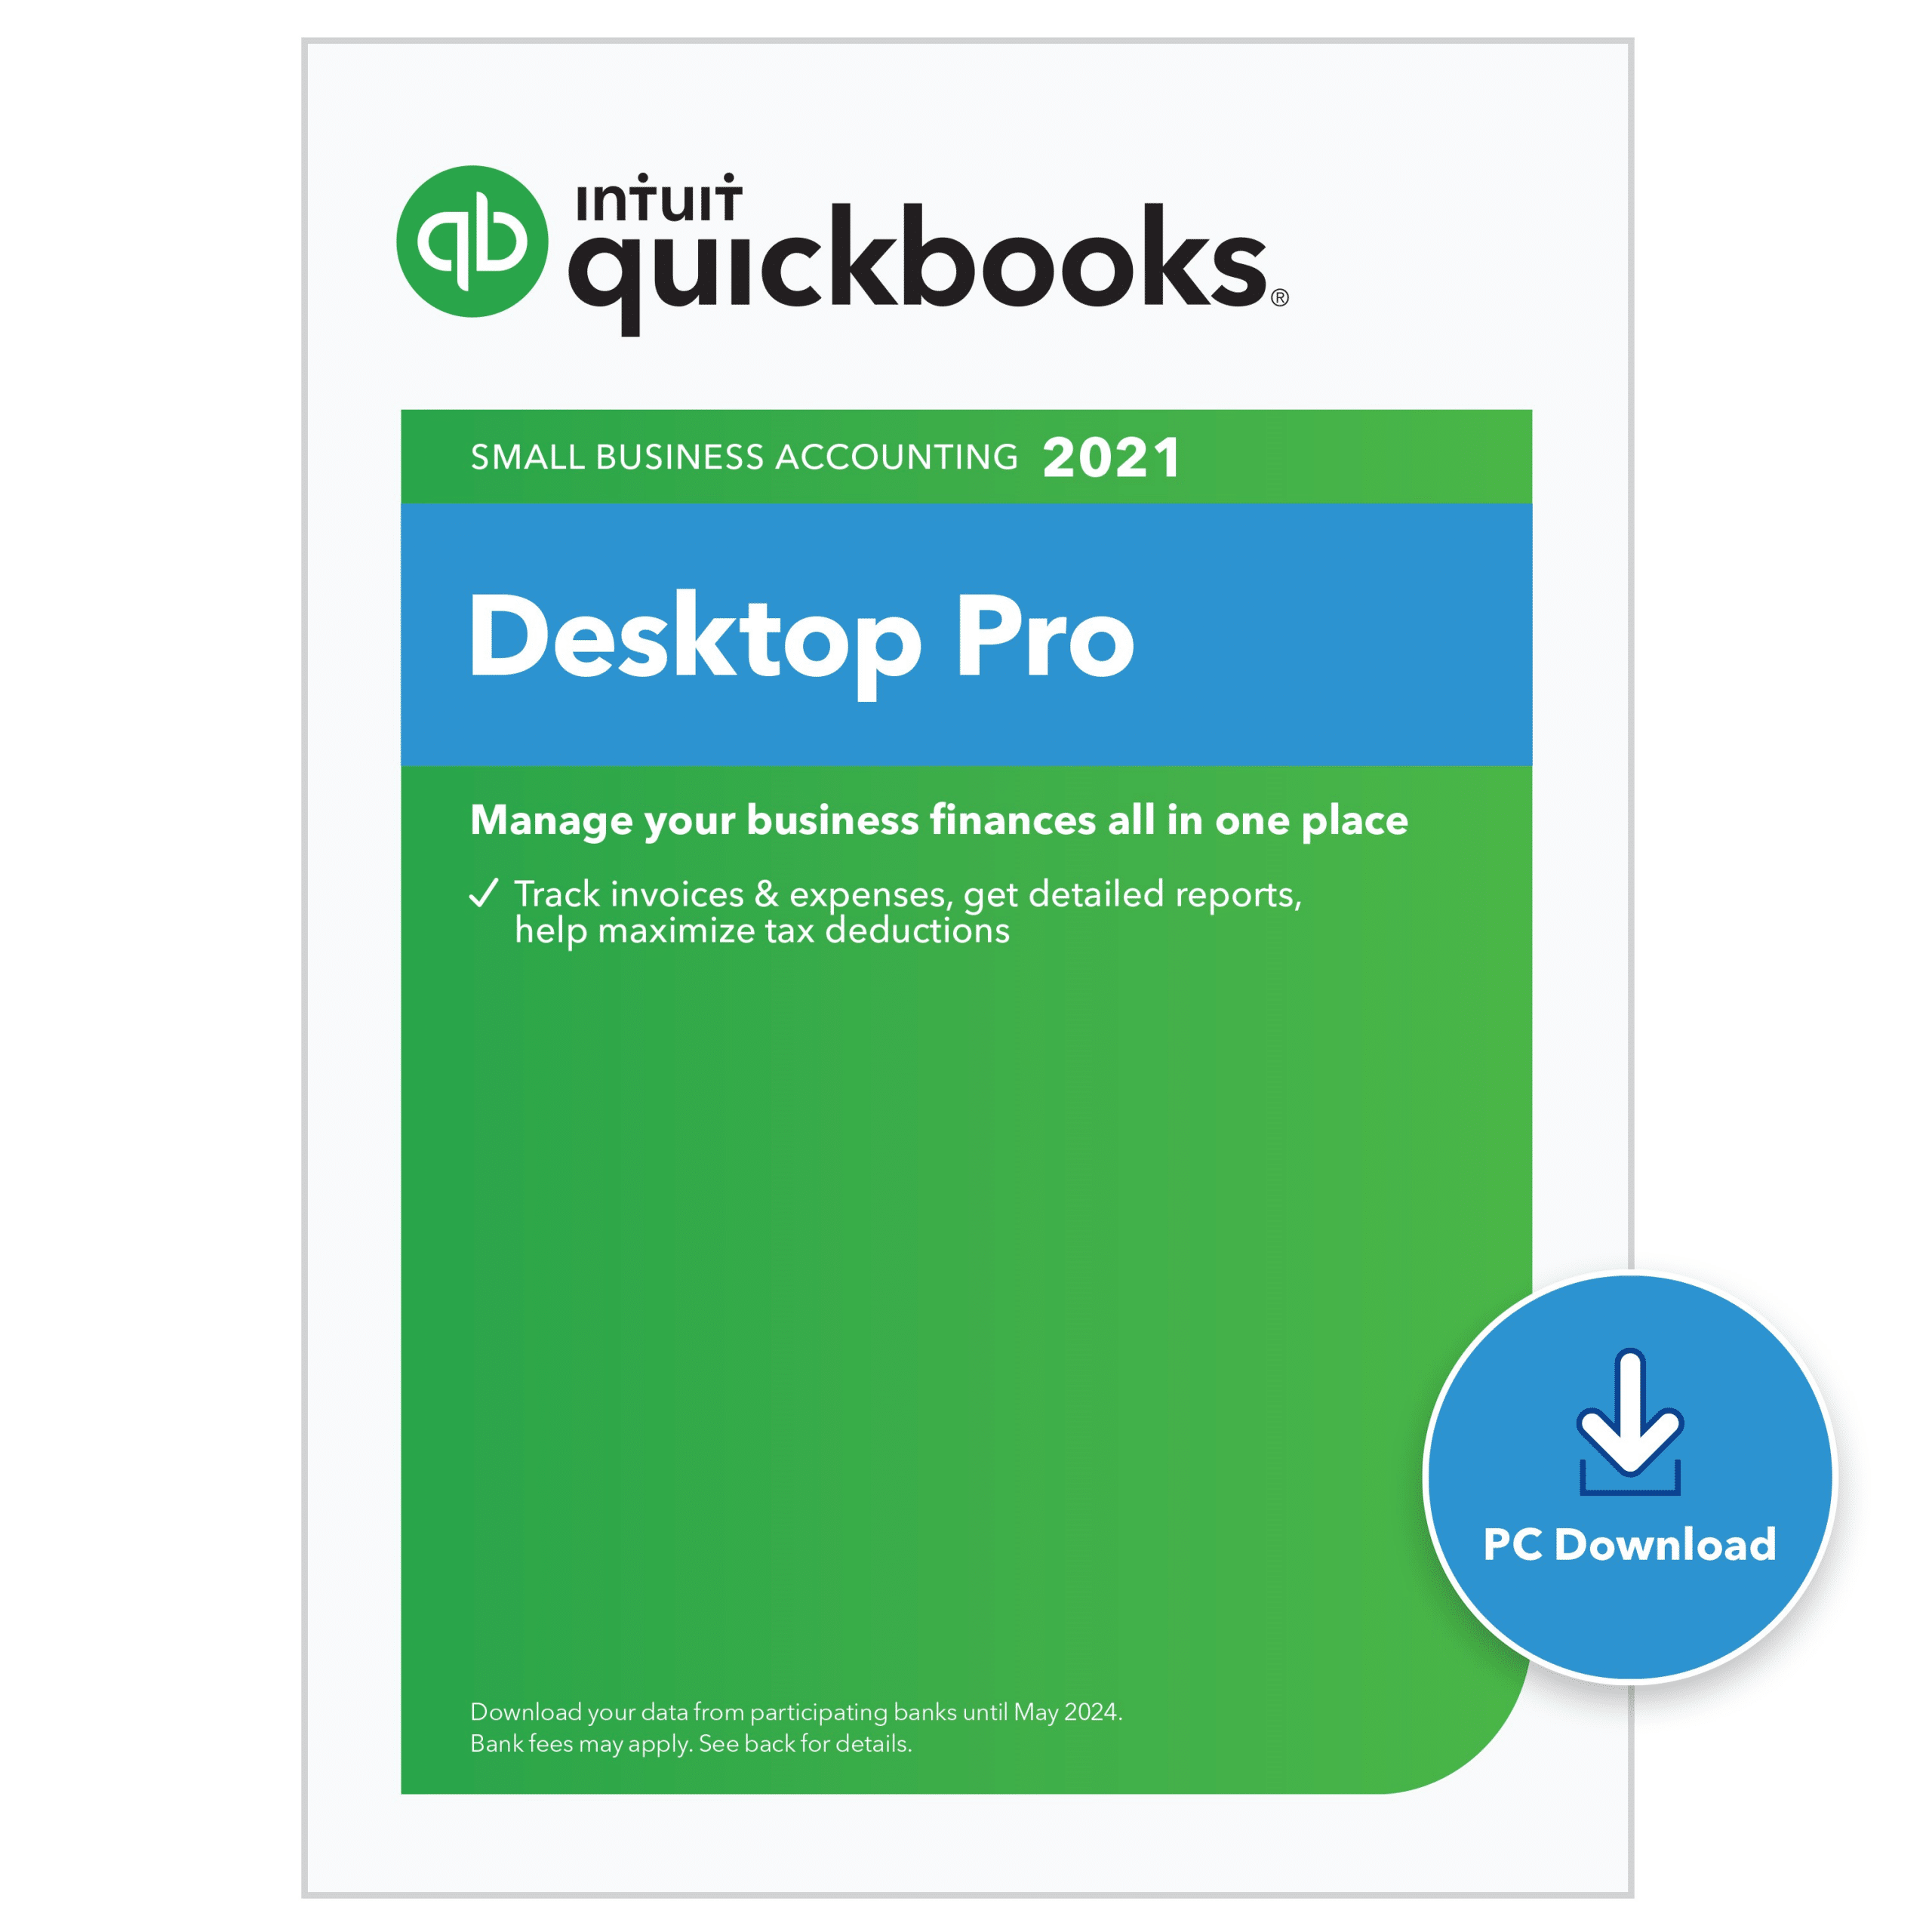 QuickBooks Pro consultant QuickBooks Pro Consultant Find QuickBooks Price - Buy QuickBooks Pro Us, Free Test Upgrade And Discover Promotional pricing for QuickBooks And Cost to Upgrade. Learn How Much Does QuickBooks Pro Cost and Get the Best Price. QuickBooks Pro consultant, QuickBooks Pro Support, QuickBooks Pro help